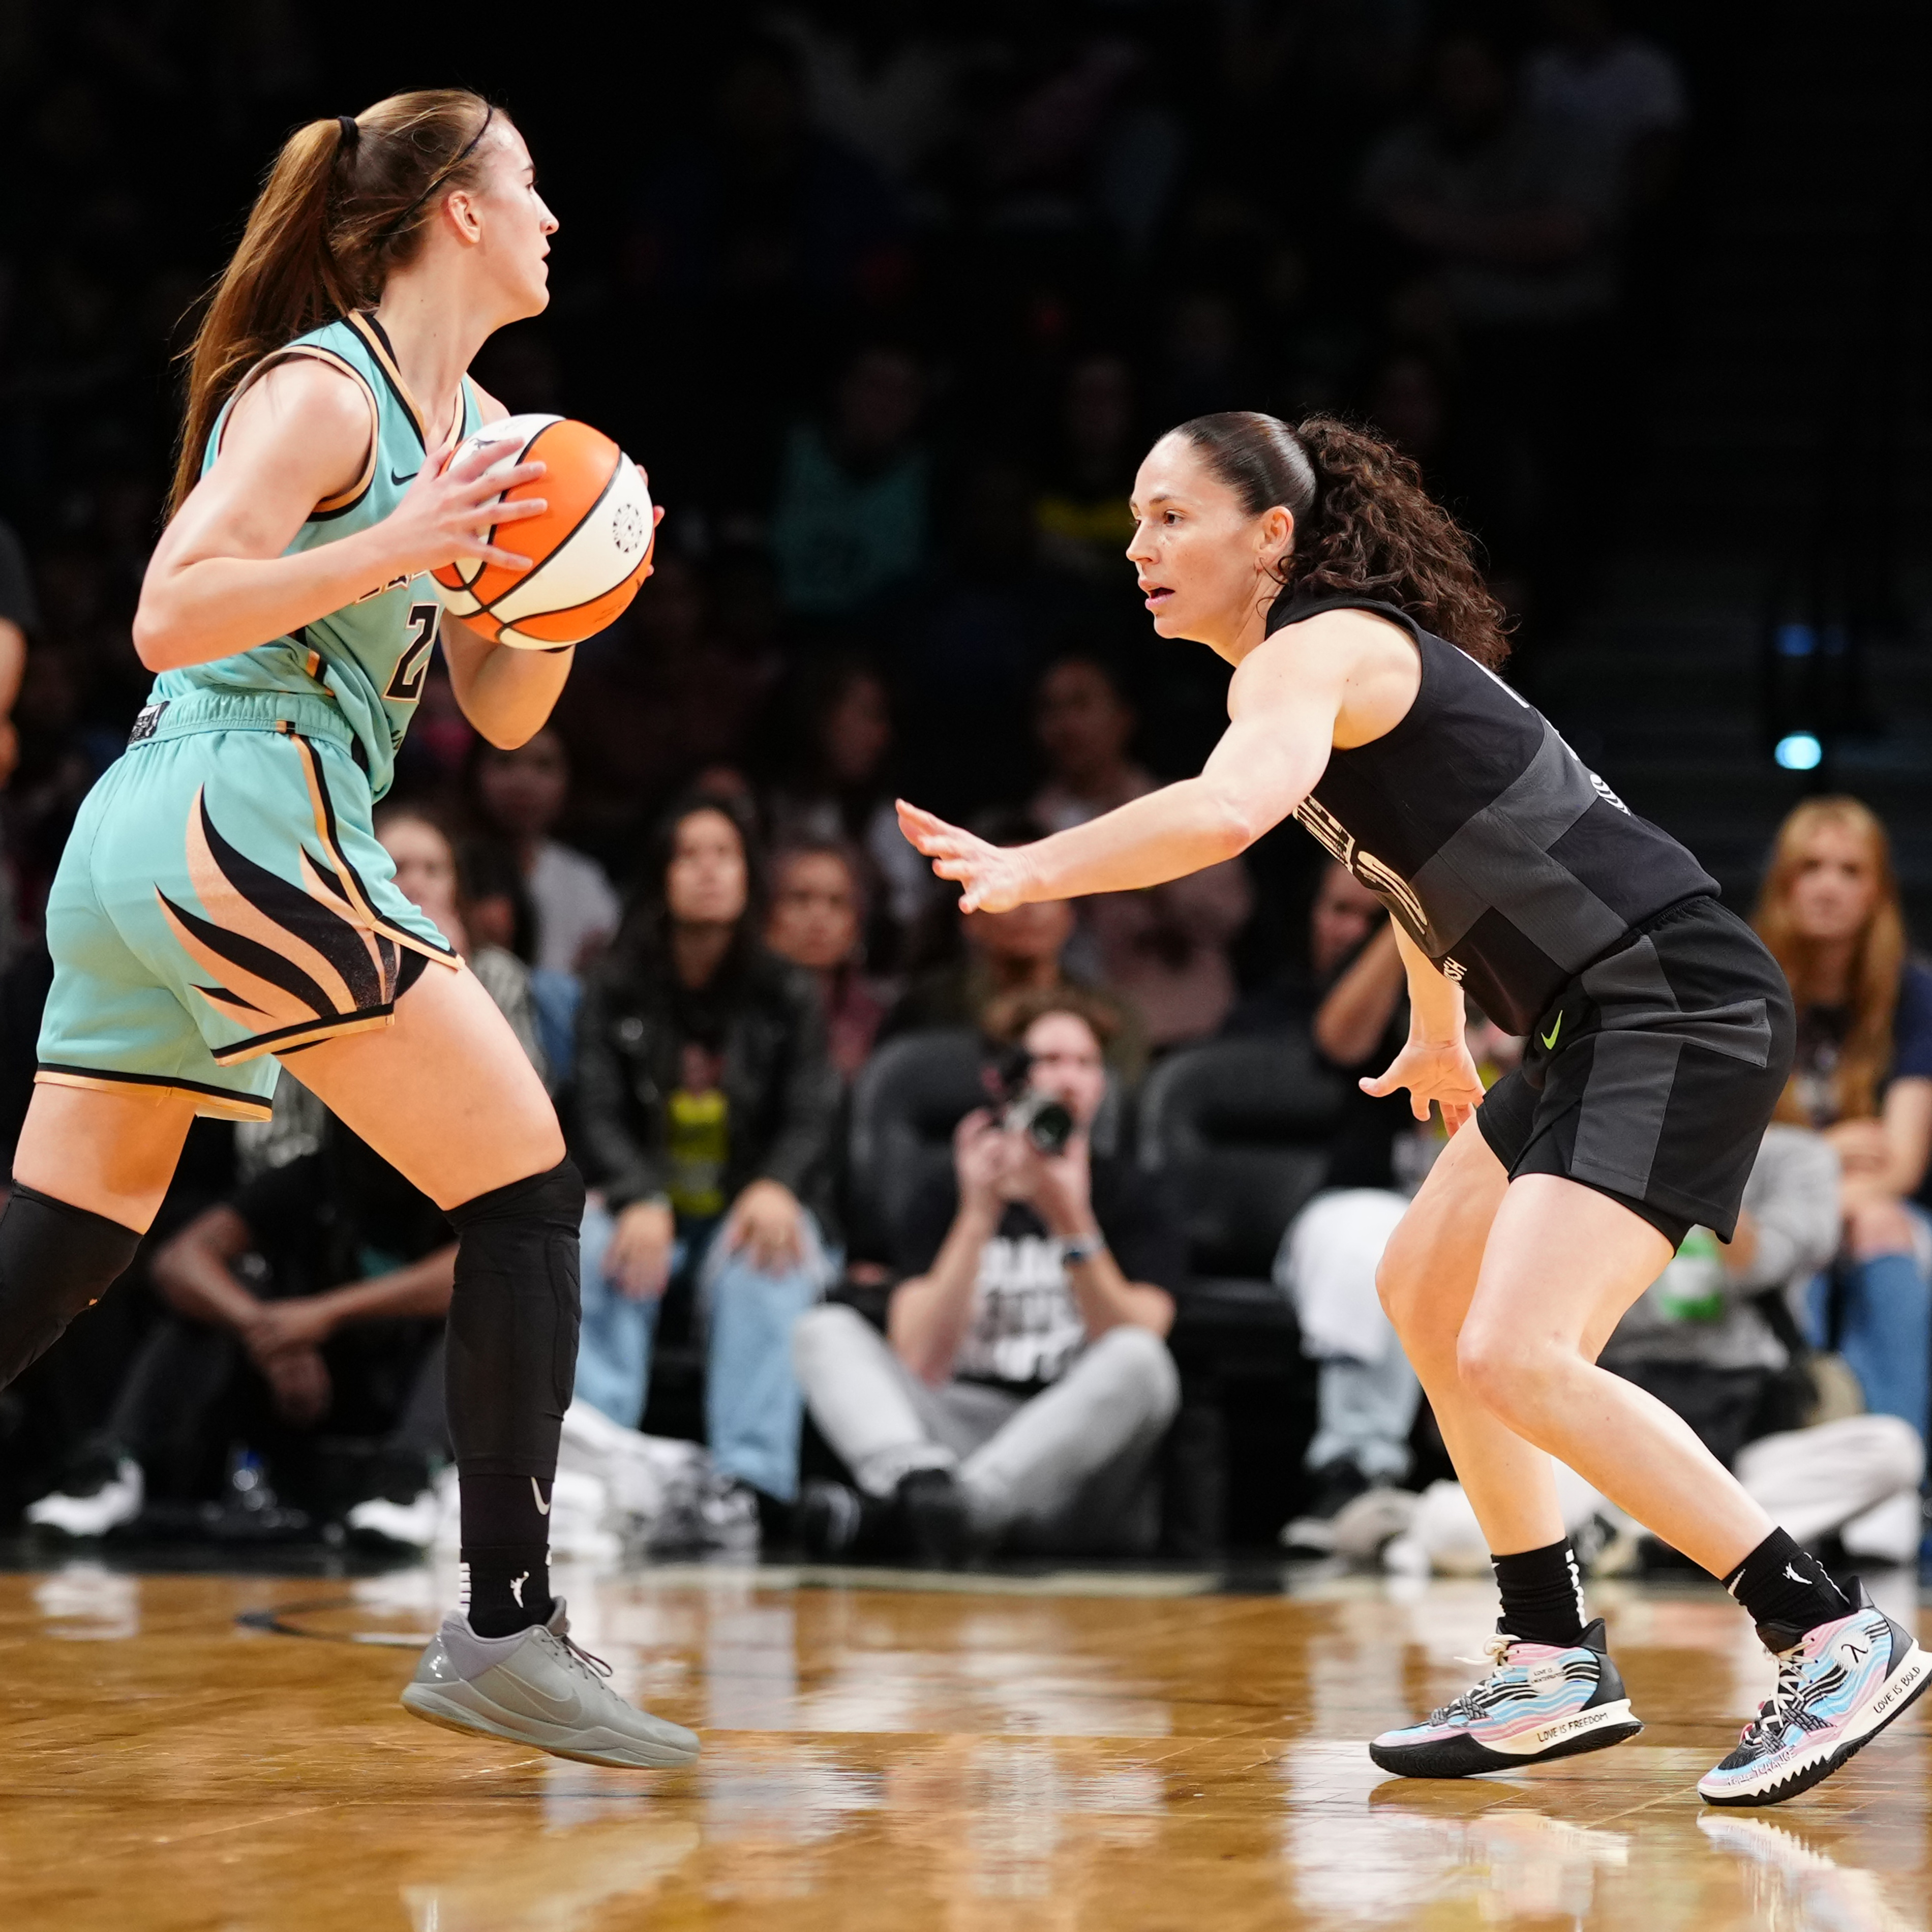 WNBA Twitter Sounds Off on Sue Bird vs. Sabrina Ionescu’s Final Matchup in New York